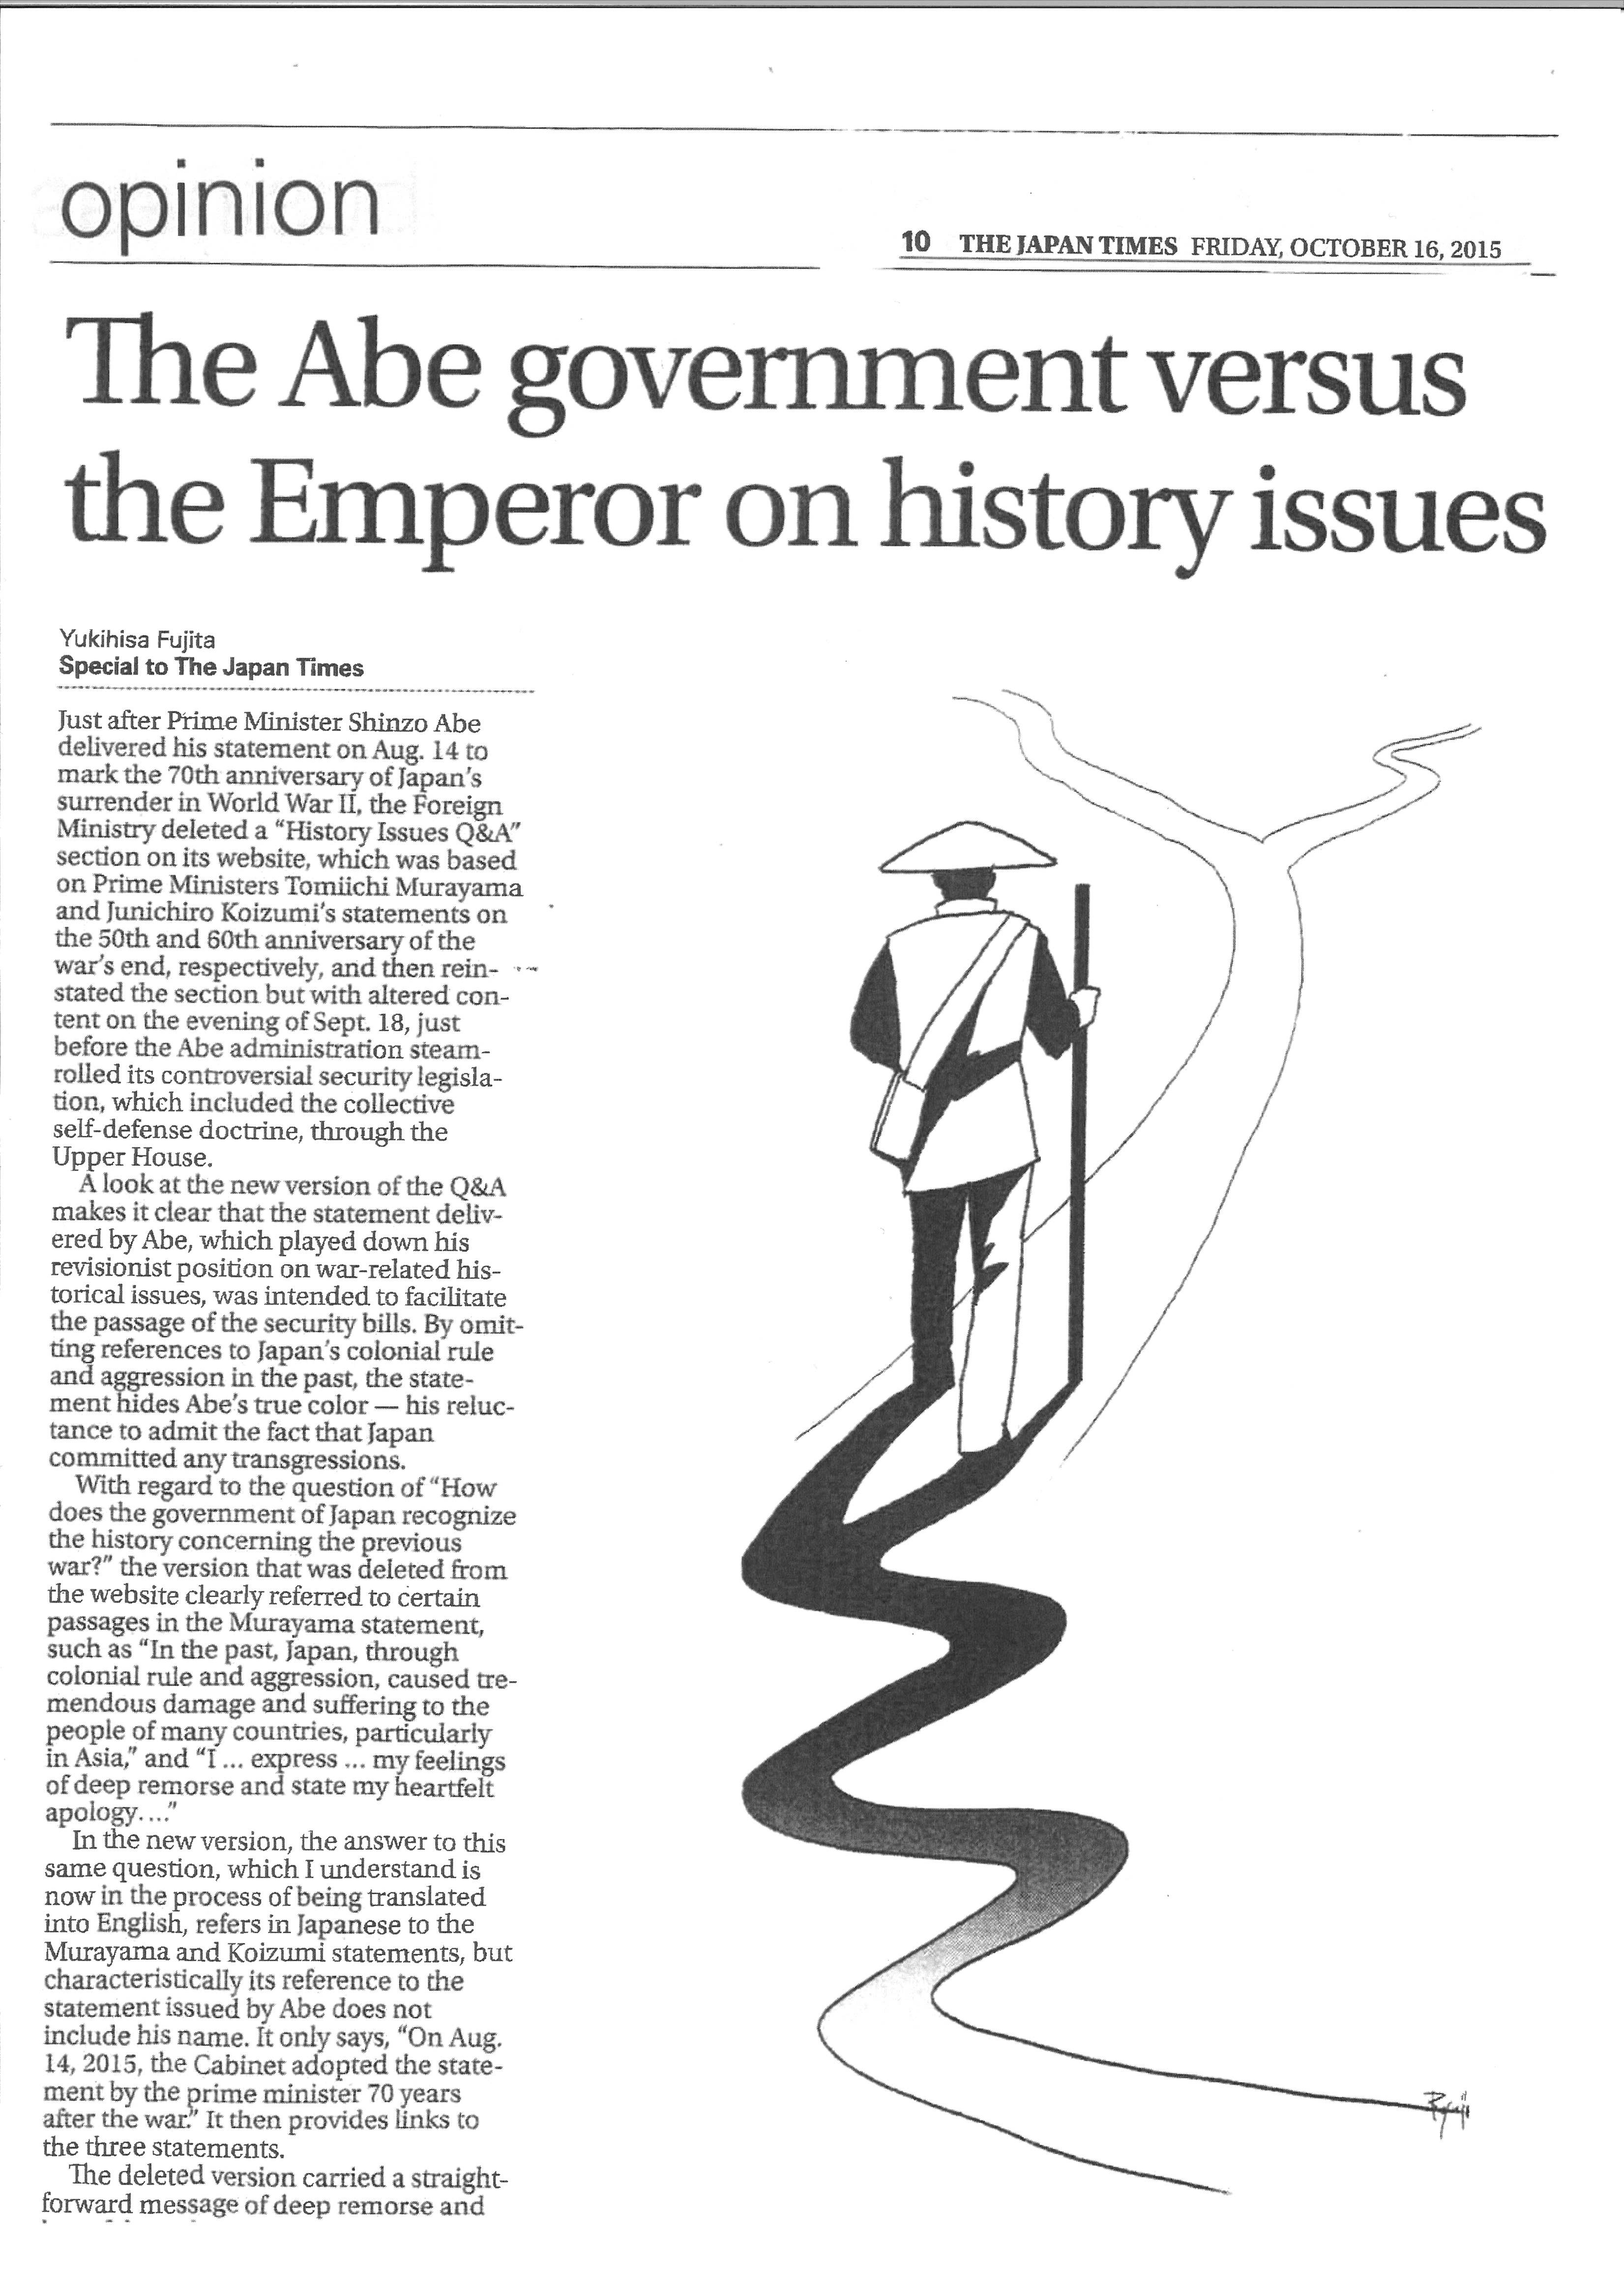 【THE JAPAN TIMES】The Abe government versus the Emperor on history issues